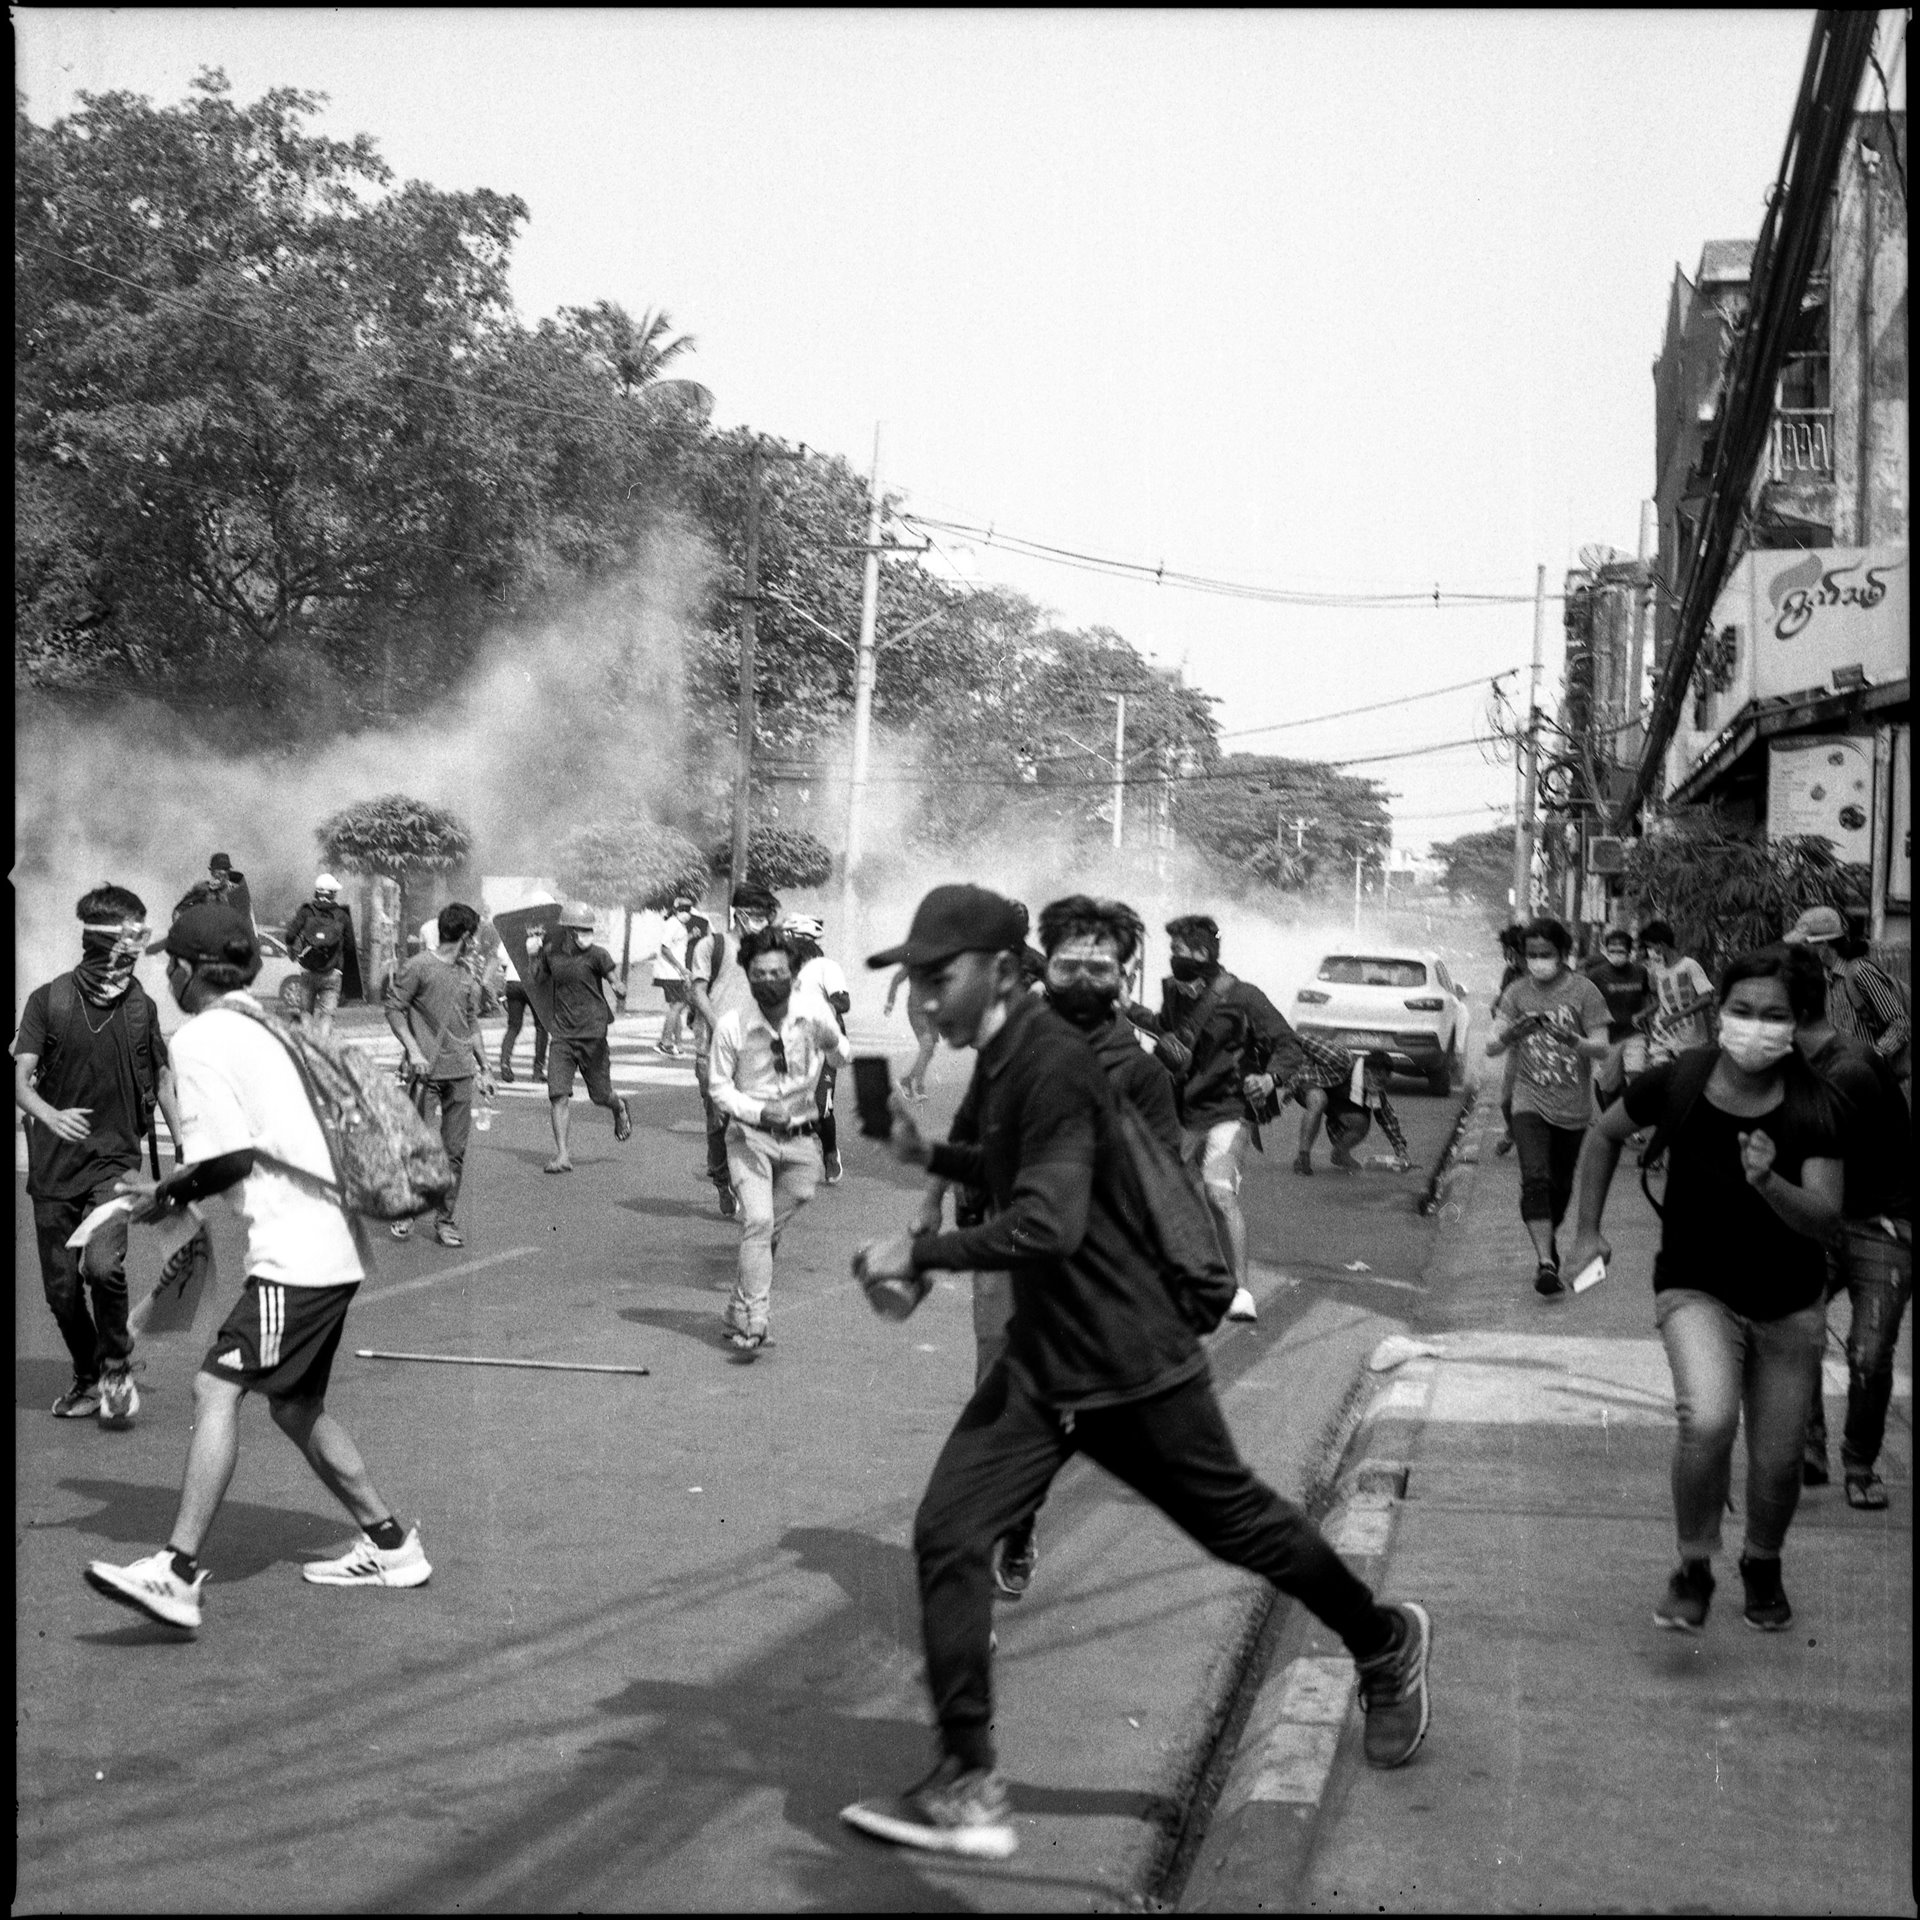 Protesters run from tear gas deployed by security forces during an anti-coup rally in Yangon, Myanmar. That day was the deadliest day of the protests up to that point, with at least 18 people killed. In addition, the police arrested two journalists and charged them with a law against defaming the military.